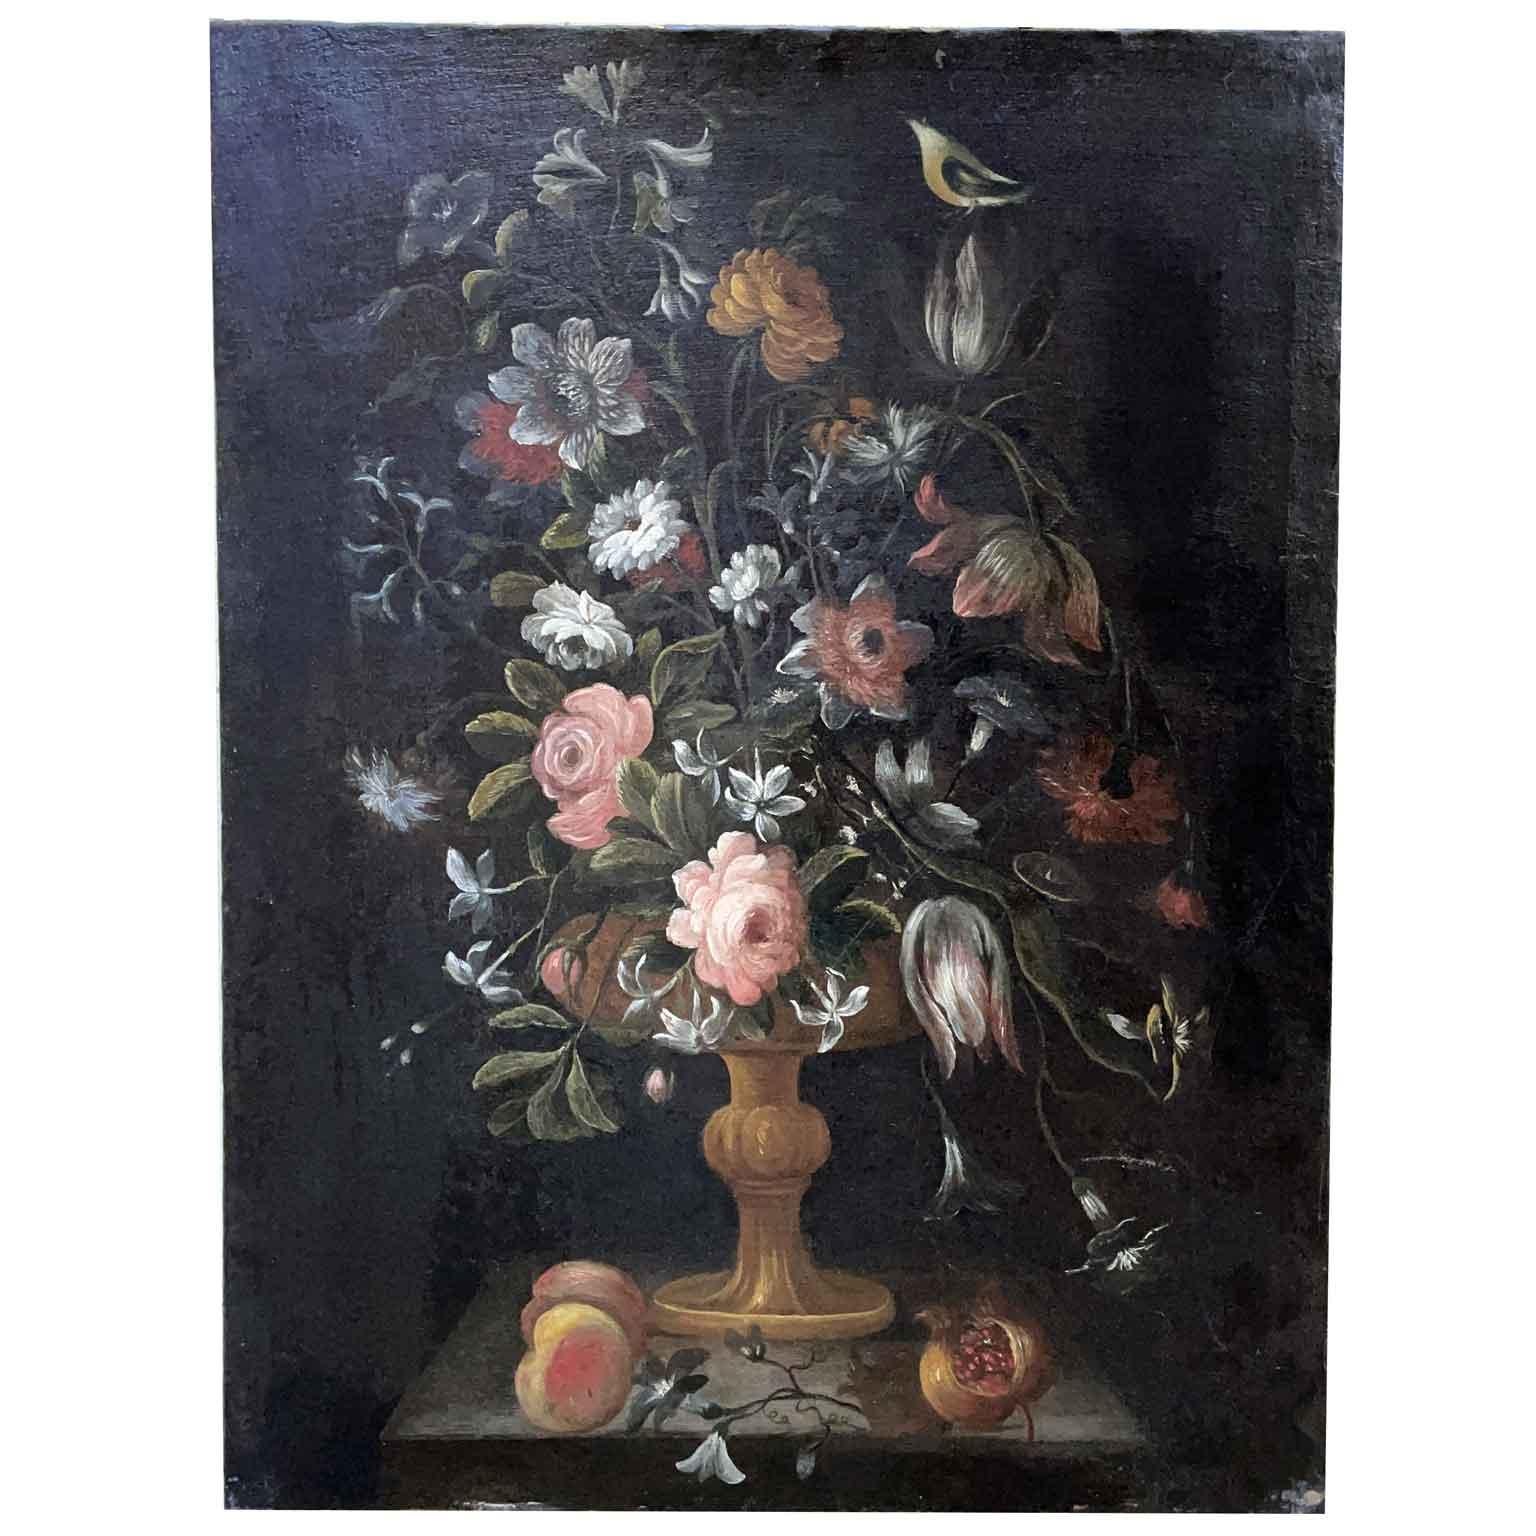 17th century Italian School still life of flowers in a vase, set of two unframed  paintings.  Oil on canvas with dark background and finely defined flowers.

These Italian Old Master Baroque Flowers Still-life paintings features a well balanced